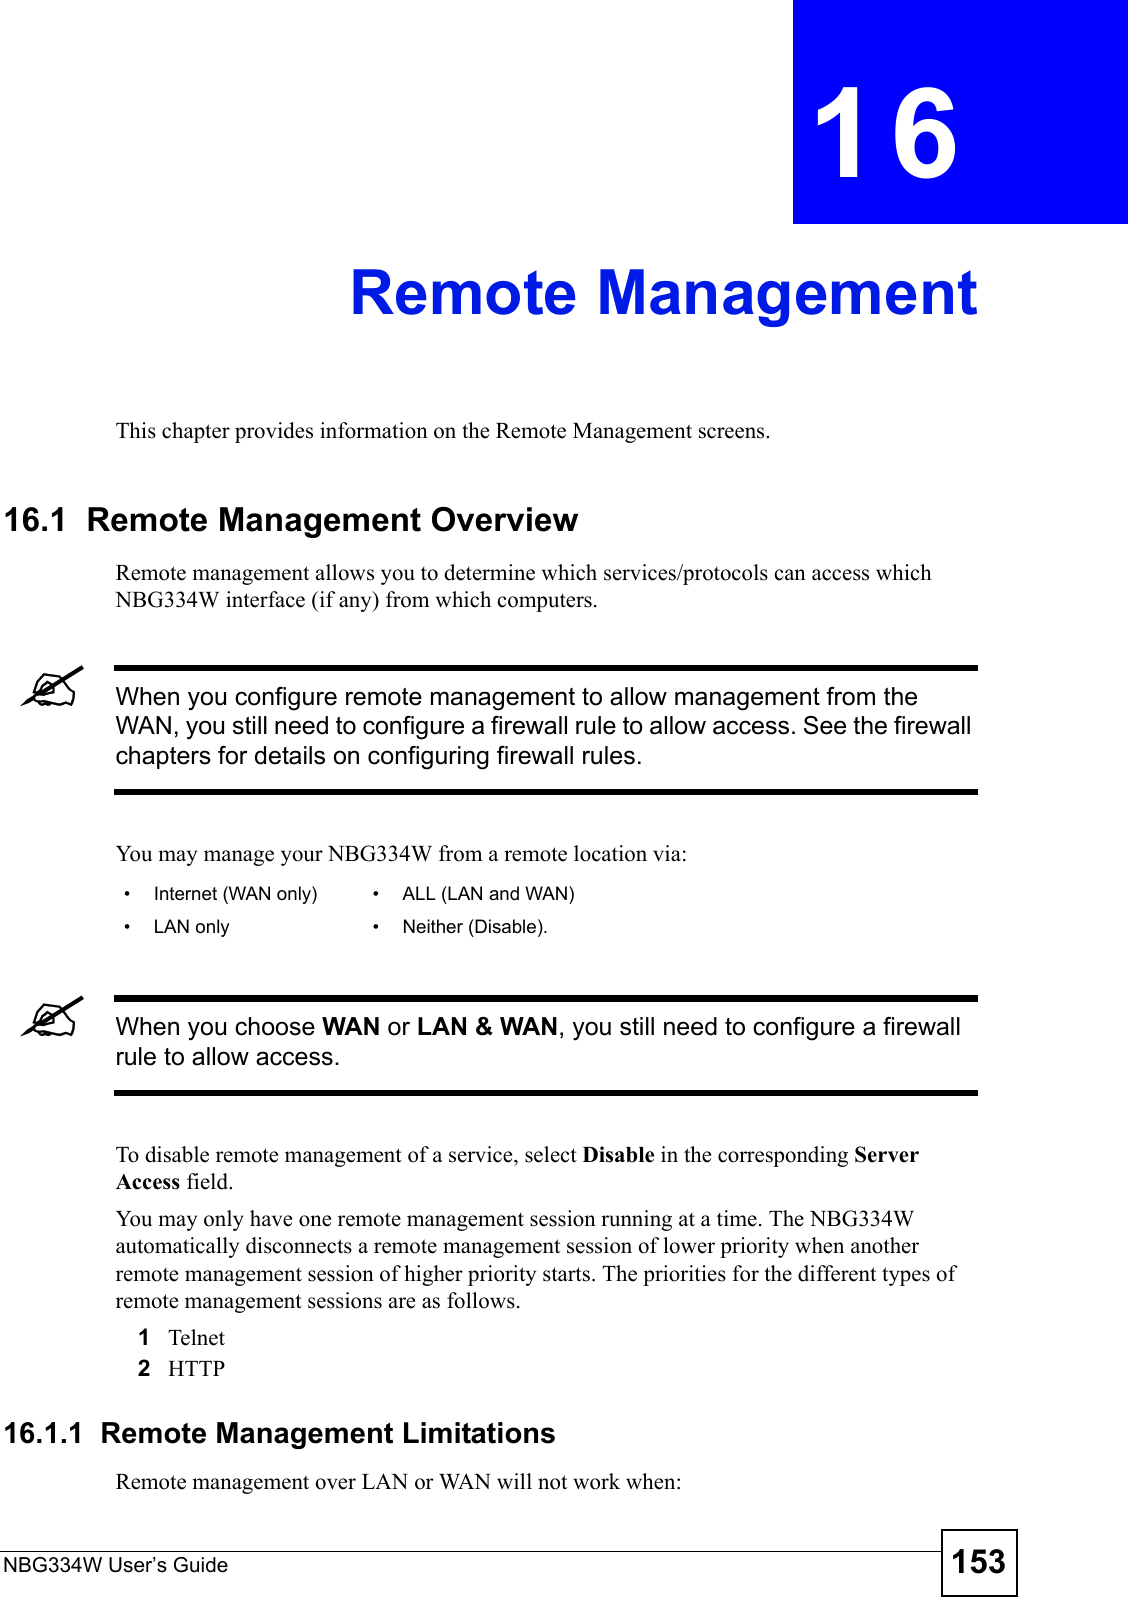 NBG334W User’s Guide 153CHAPTER  16 Remote ManagementThis chapter provides information on the Remote Management screens. 16.1  Remote Management OverviewRemote management allows you to determine which services/protocols can access which NBG334W interface (if any) from which computers.&quot;When you configure remote management to allow management from the WAN, you still need to configure a firewall rule to allow access. See the firewall chapters for details on configuring firewall rules.You may manage your NBG334W from a remote location via:&quot;When you choose WAN or LAN &amp; WAN, you still need to configure a firewall rule to allow access.To disable remote management of a service, select Disable in the corresponding Server Access field.You may only have one remote management session running at a time. The NBG334W automatically disconnects a remote management session of lower priority when another remote management session of higher priority starts. The priorities for the different types of remote management sessions are as follows.1Telnet2HTTP16.1.1  Remote Management LimitationsRemote management over LAN or WAN will not work when:• Internet (WAN only) • ALL (LAN and WAN)• LAN only • Neither (Disable).